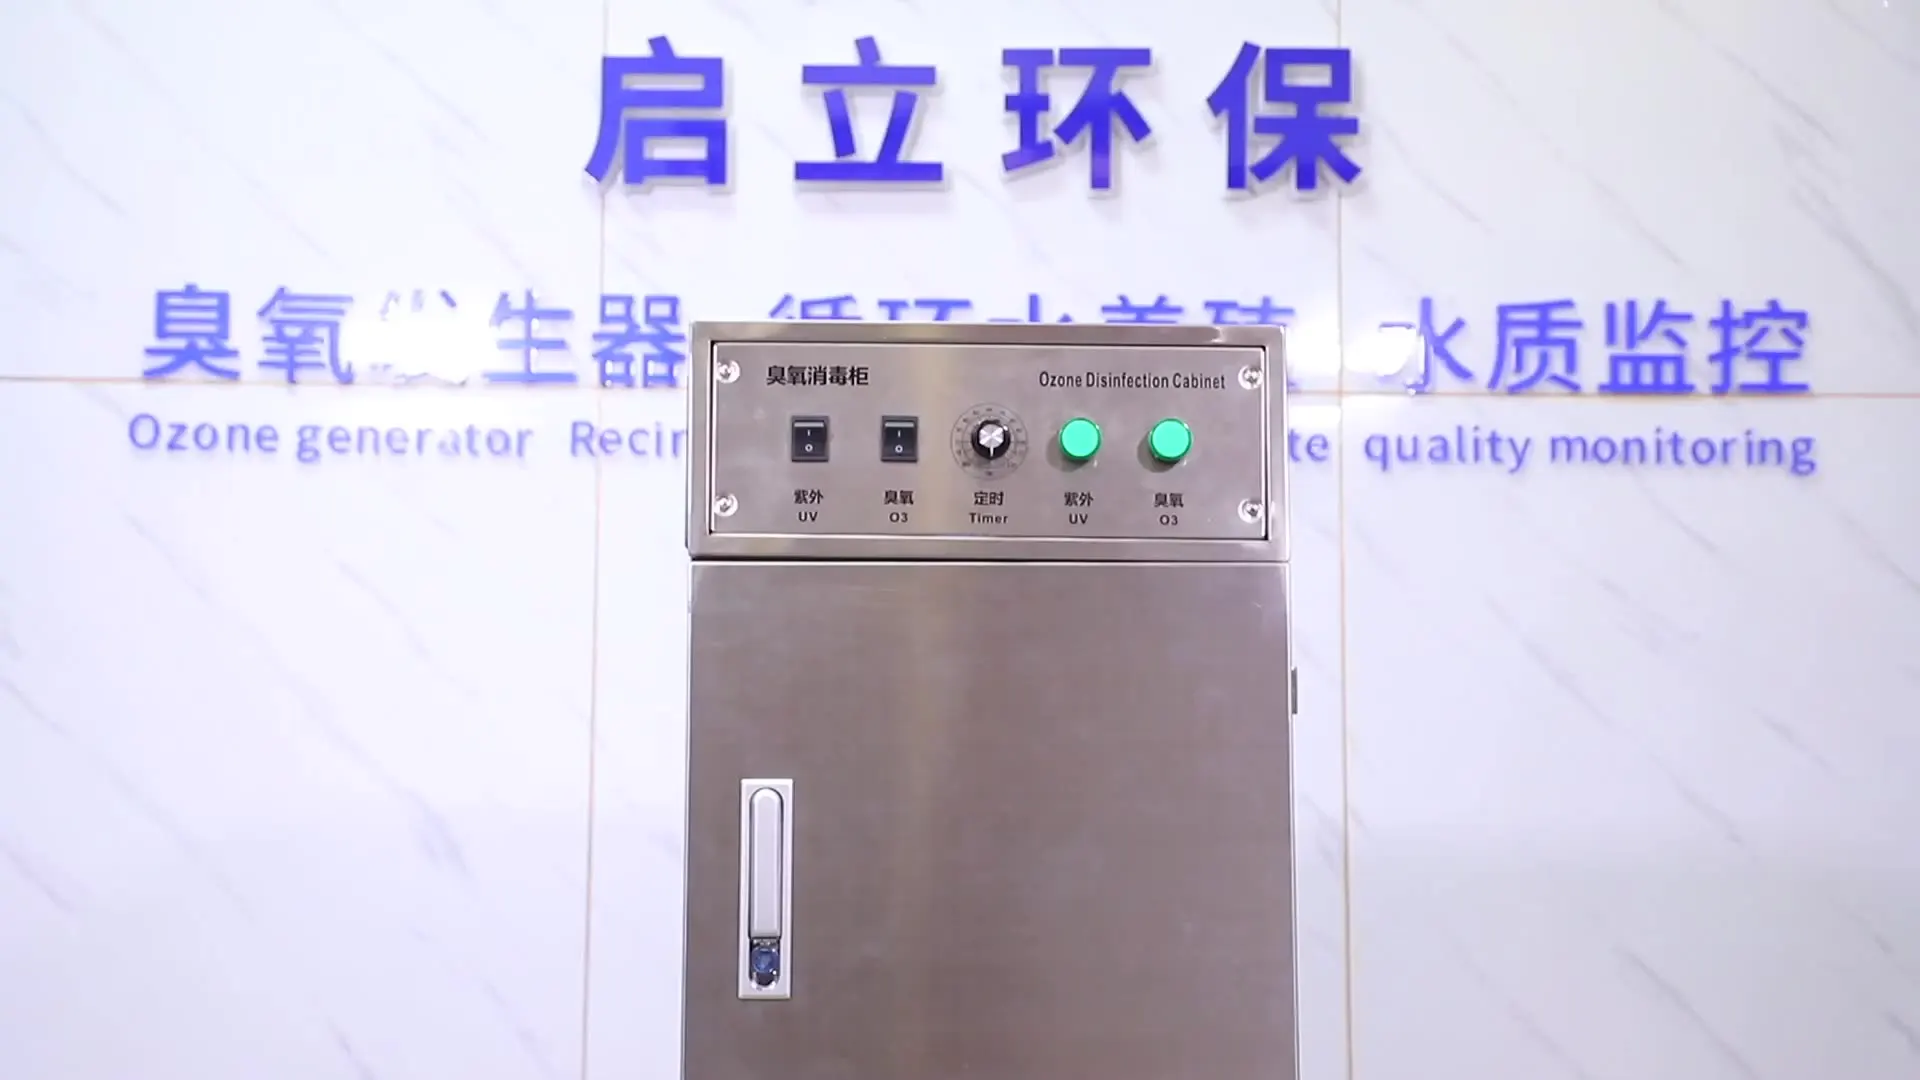 

Qlozone tableware sterilizer ozone disinfection cabinet towel sterlizer cabinet food containers UV disinfecting cabinets